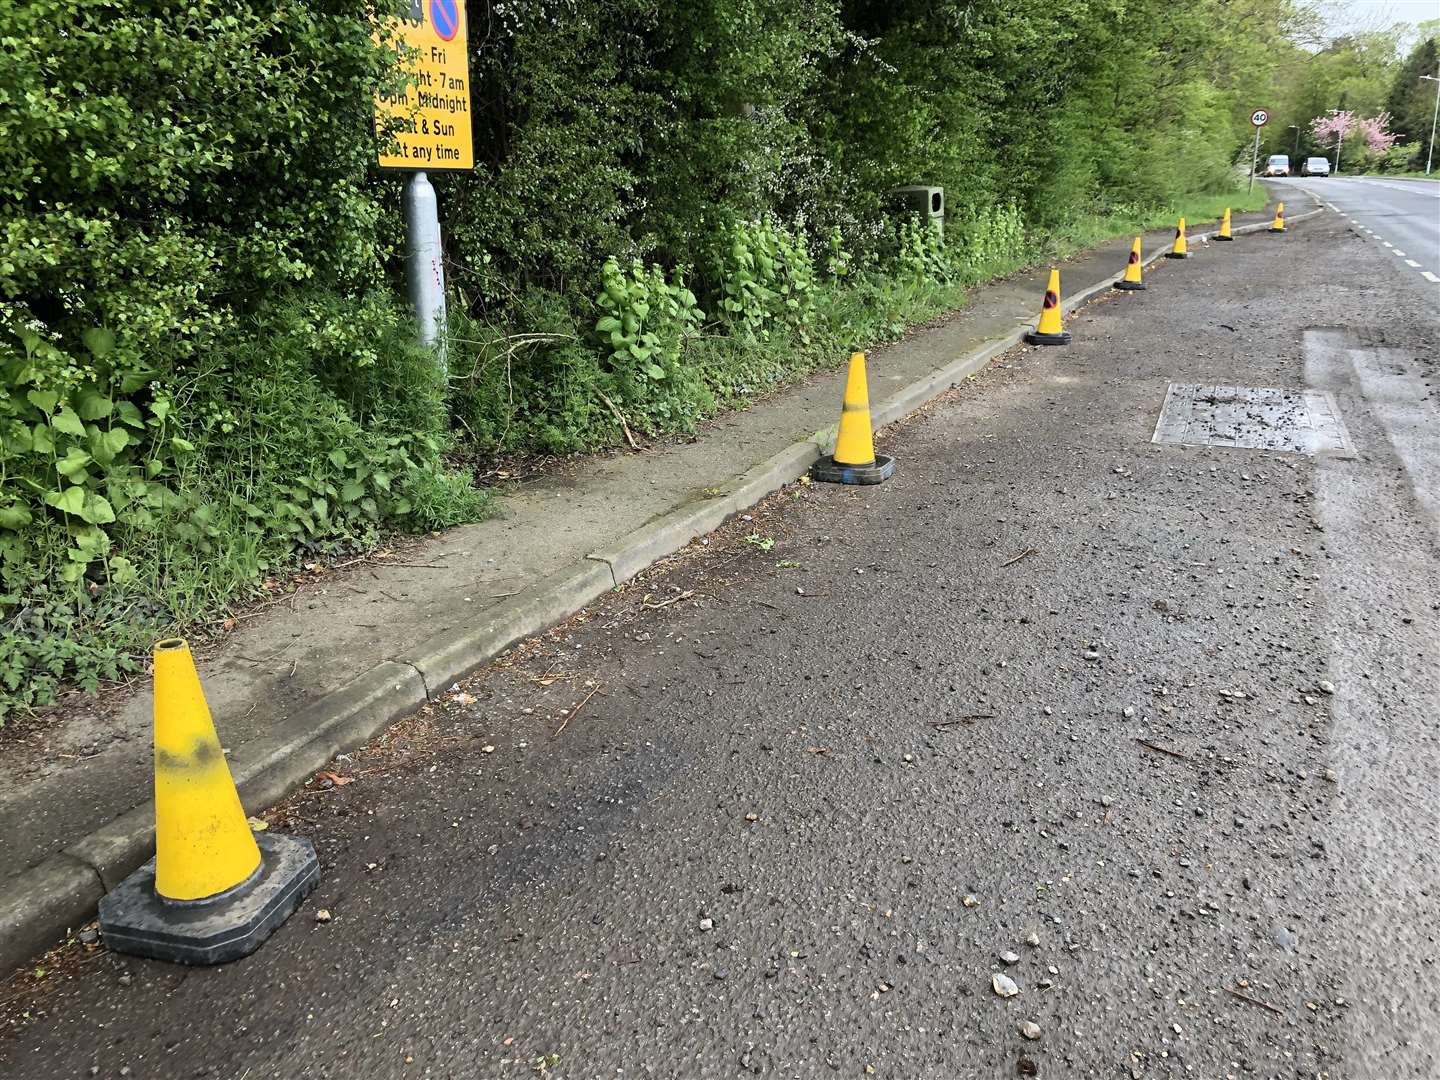 The cones to stop overnight parking (1652004)